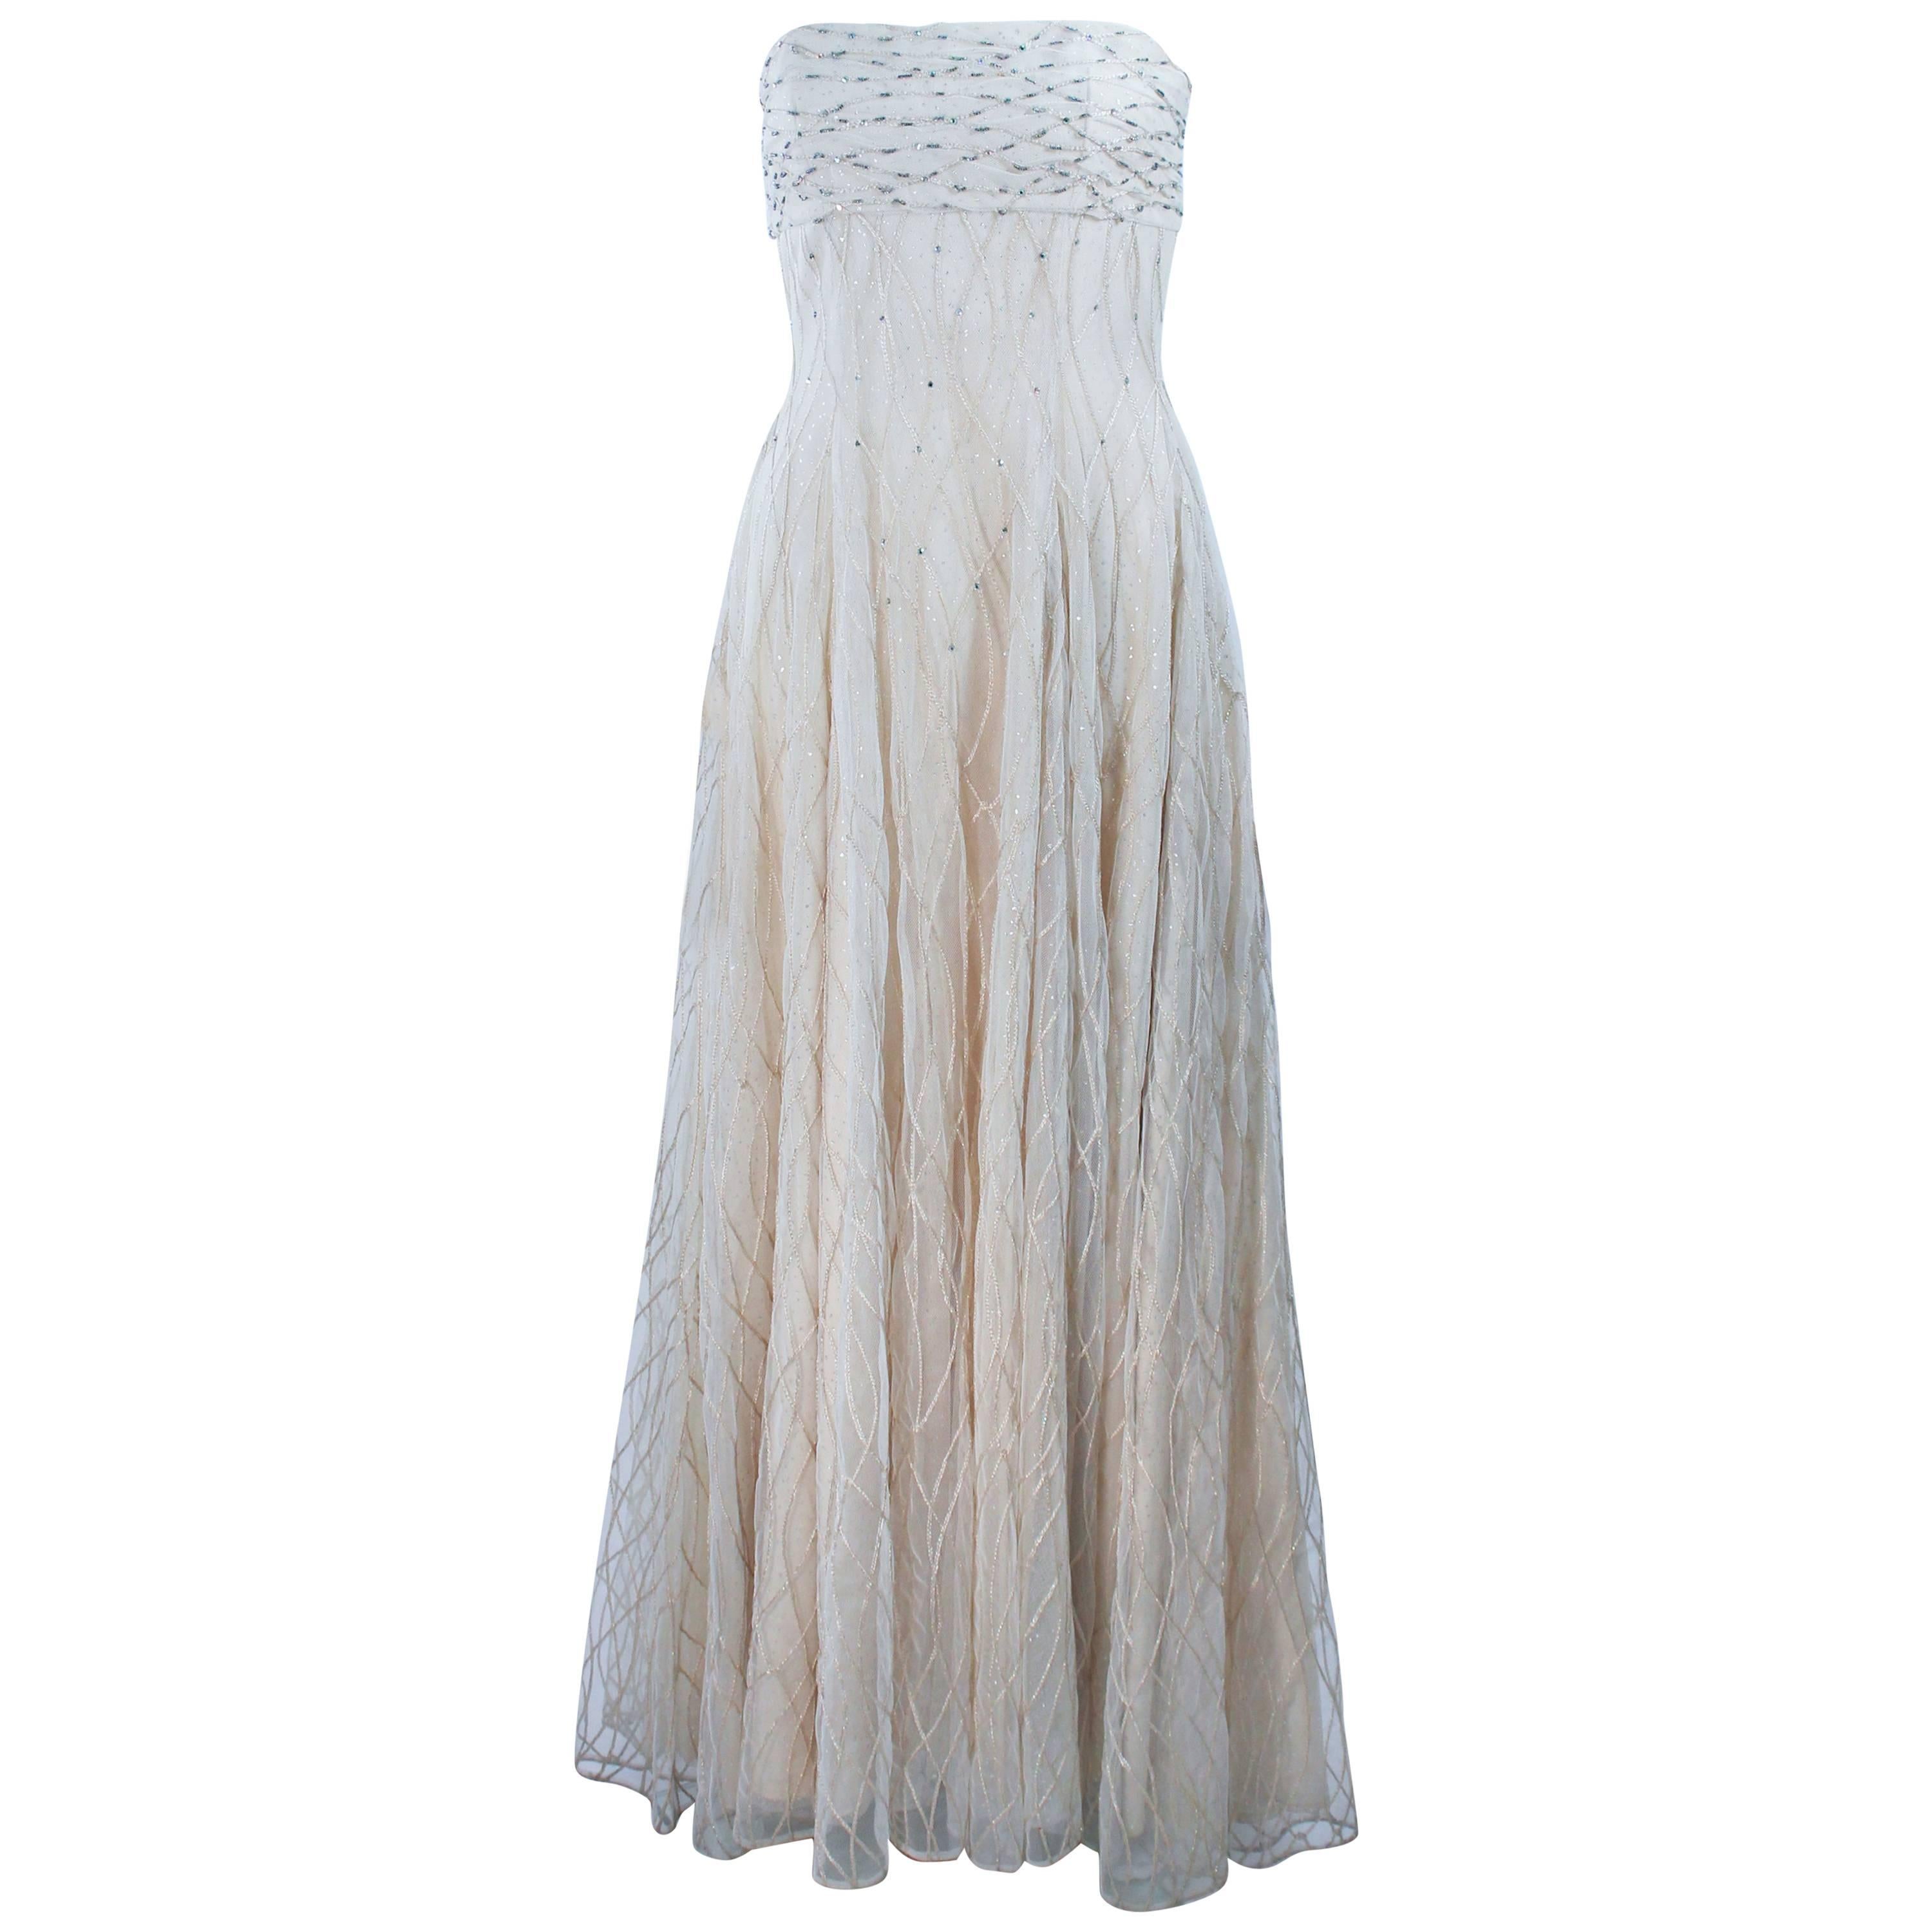 VICTOR COSTA Off White Iridescent Strapless Beaded Gown Size 2 4